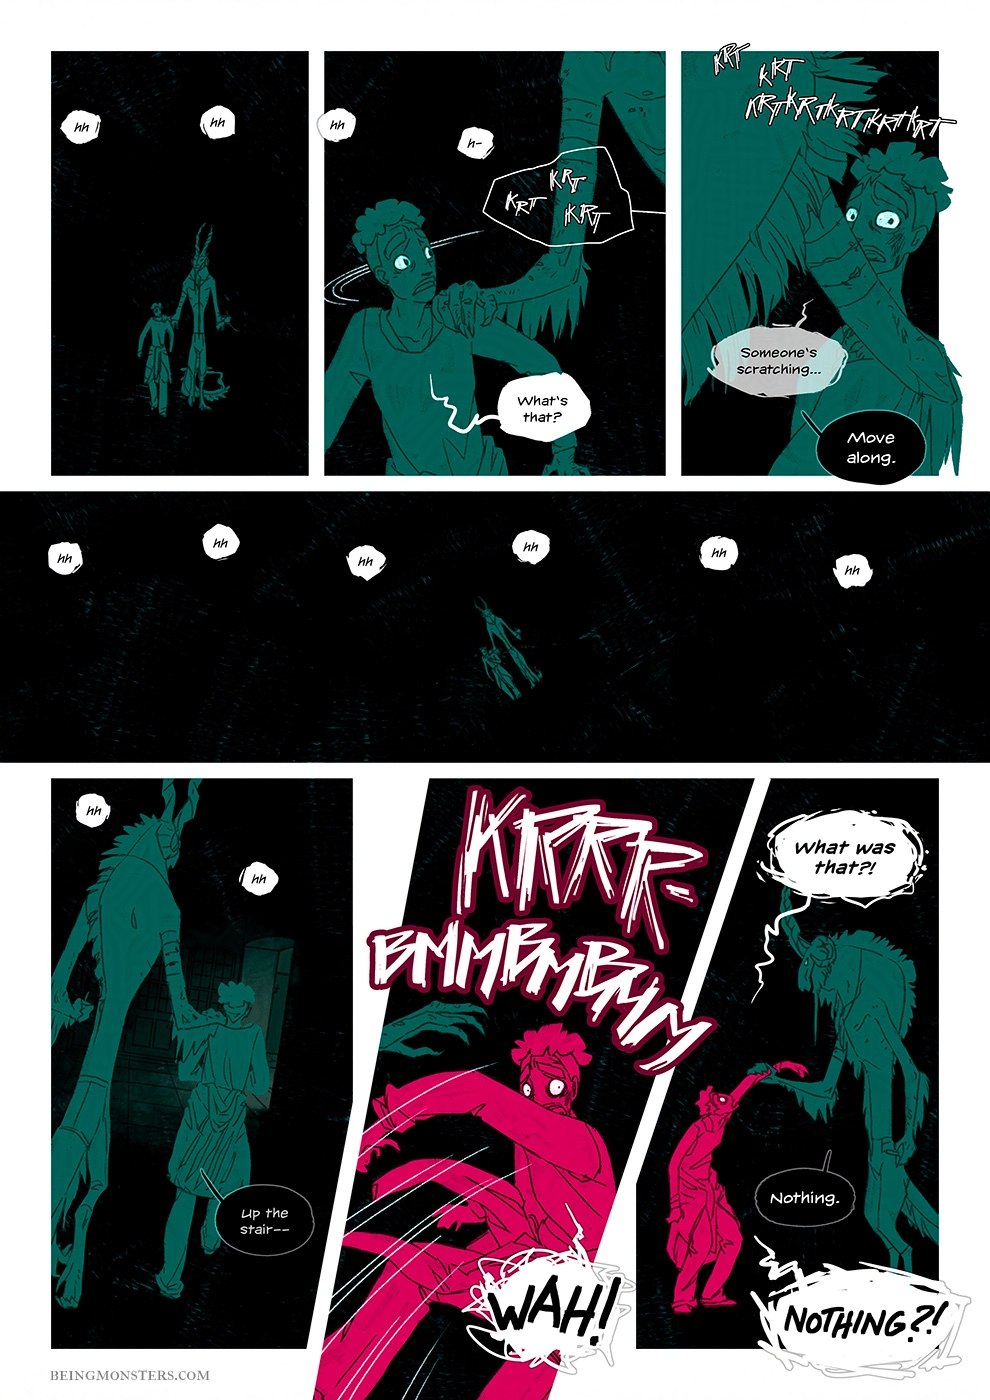 Being Monsters Book 2 Chapter 7 Page 12 EN